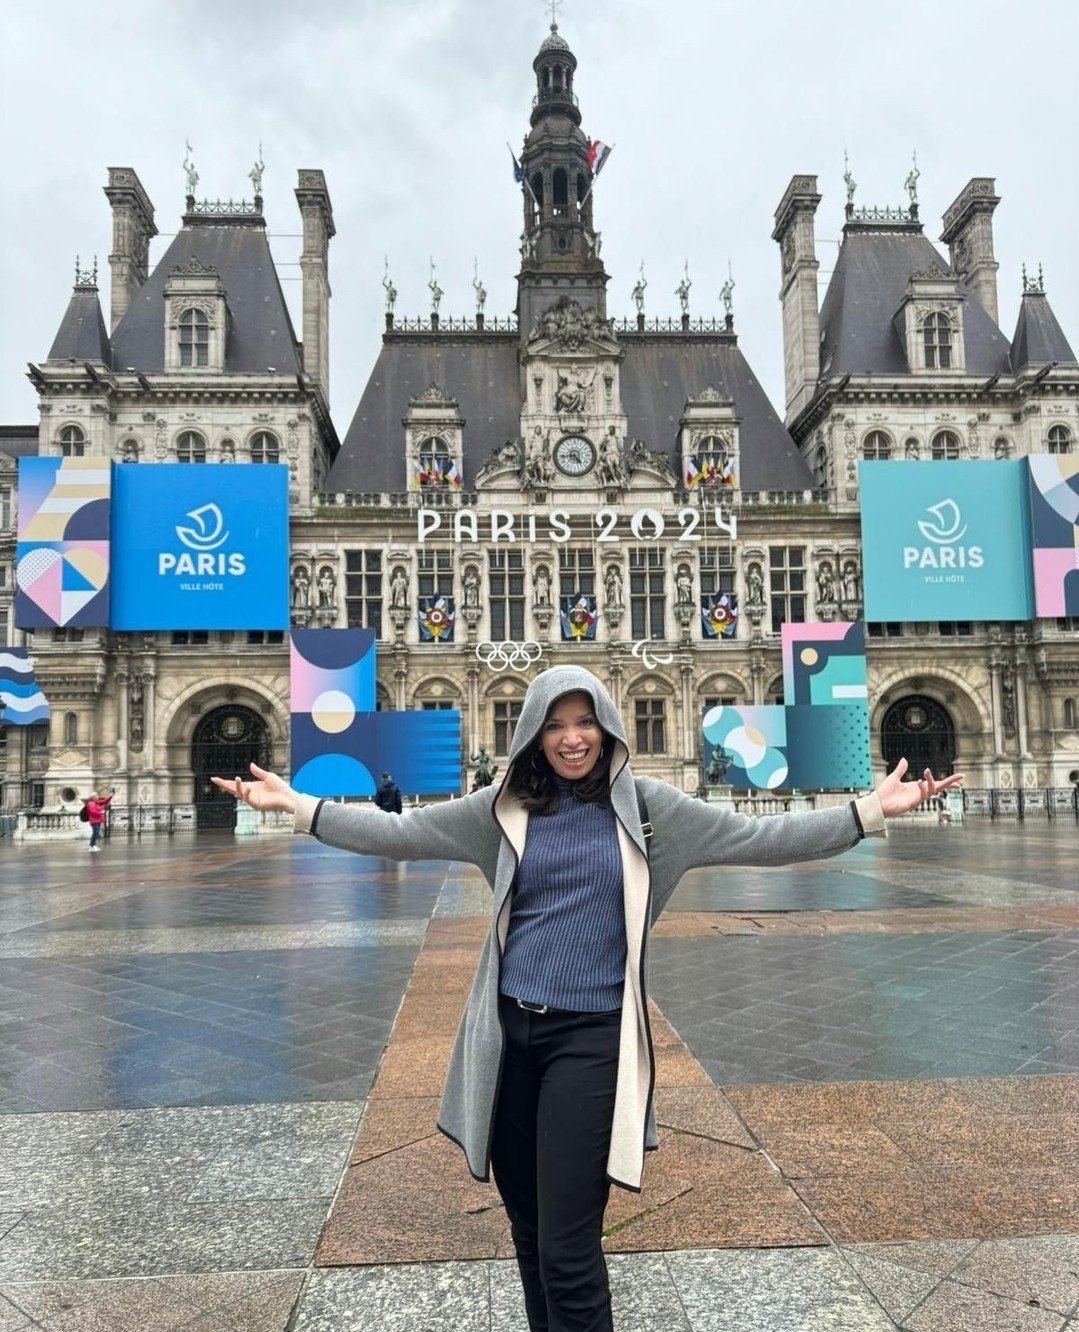 Lorna taking in the architecture and artistry of Paris!⁠